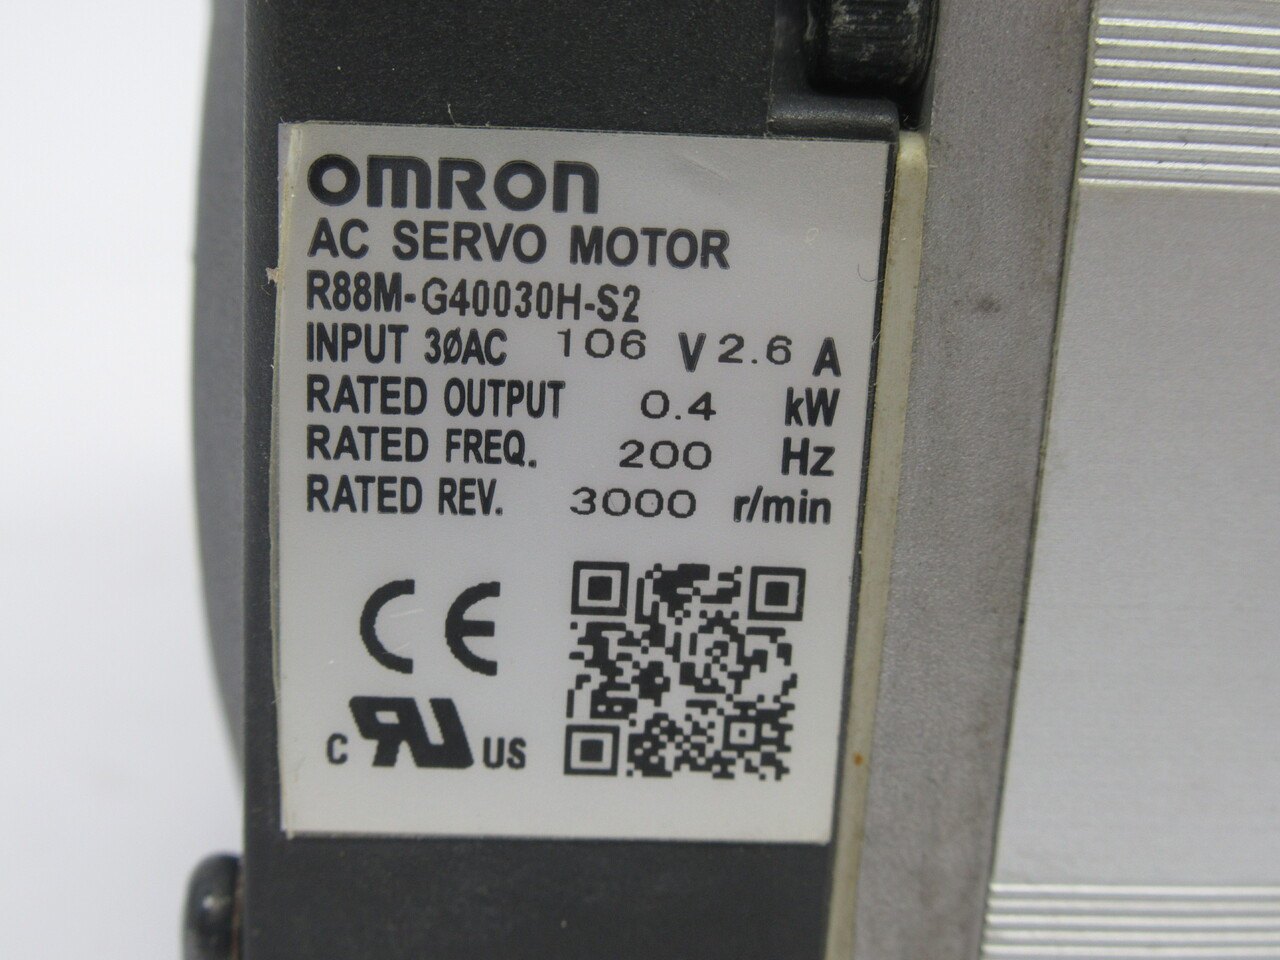 Omron R88M-G40030H-S2 AC Servo Motor 0.4kW 3000RPM 106V 2.6A 200Hz AS IS